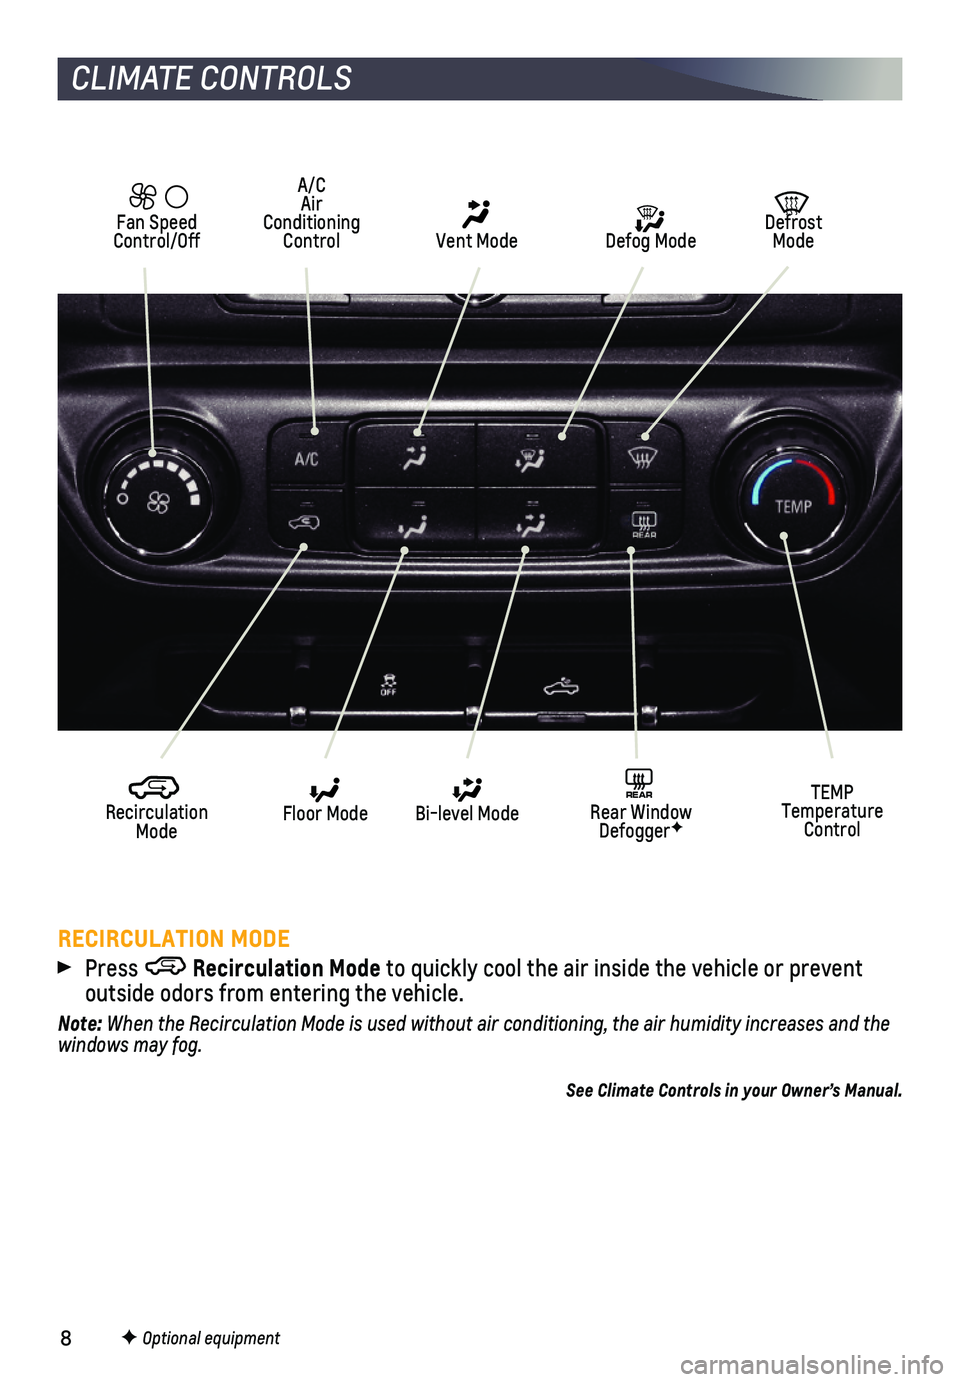 CHEVROLET SILVERADO 2018  Get To Know Guide 8
CLIMATE CONTROLS
RECIRCULATION MODE
 Press Recirculation Mode to quickly cool the air inside the vehicle or prevent  
outside odors from entering the vehicle.
Note: When the Recirculation Mode is us